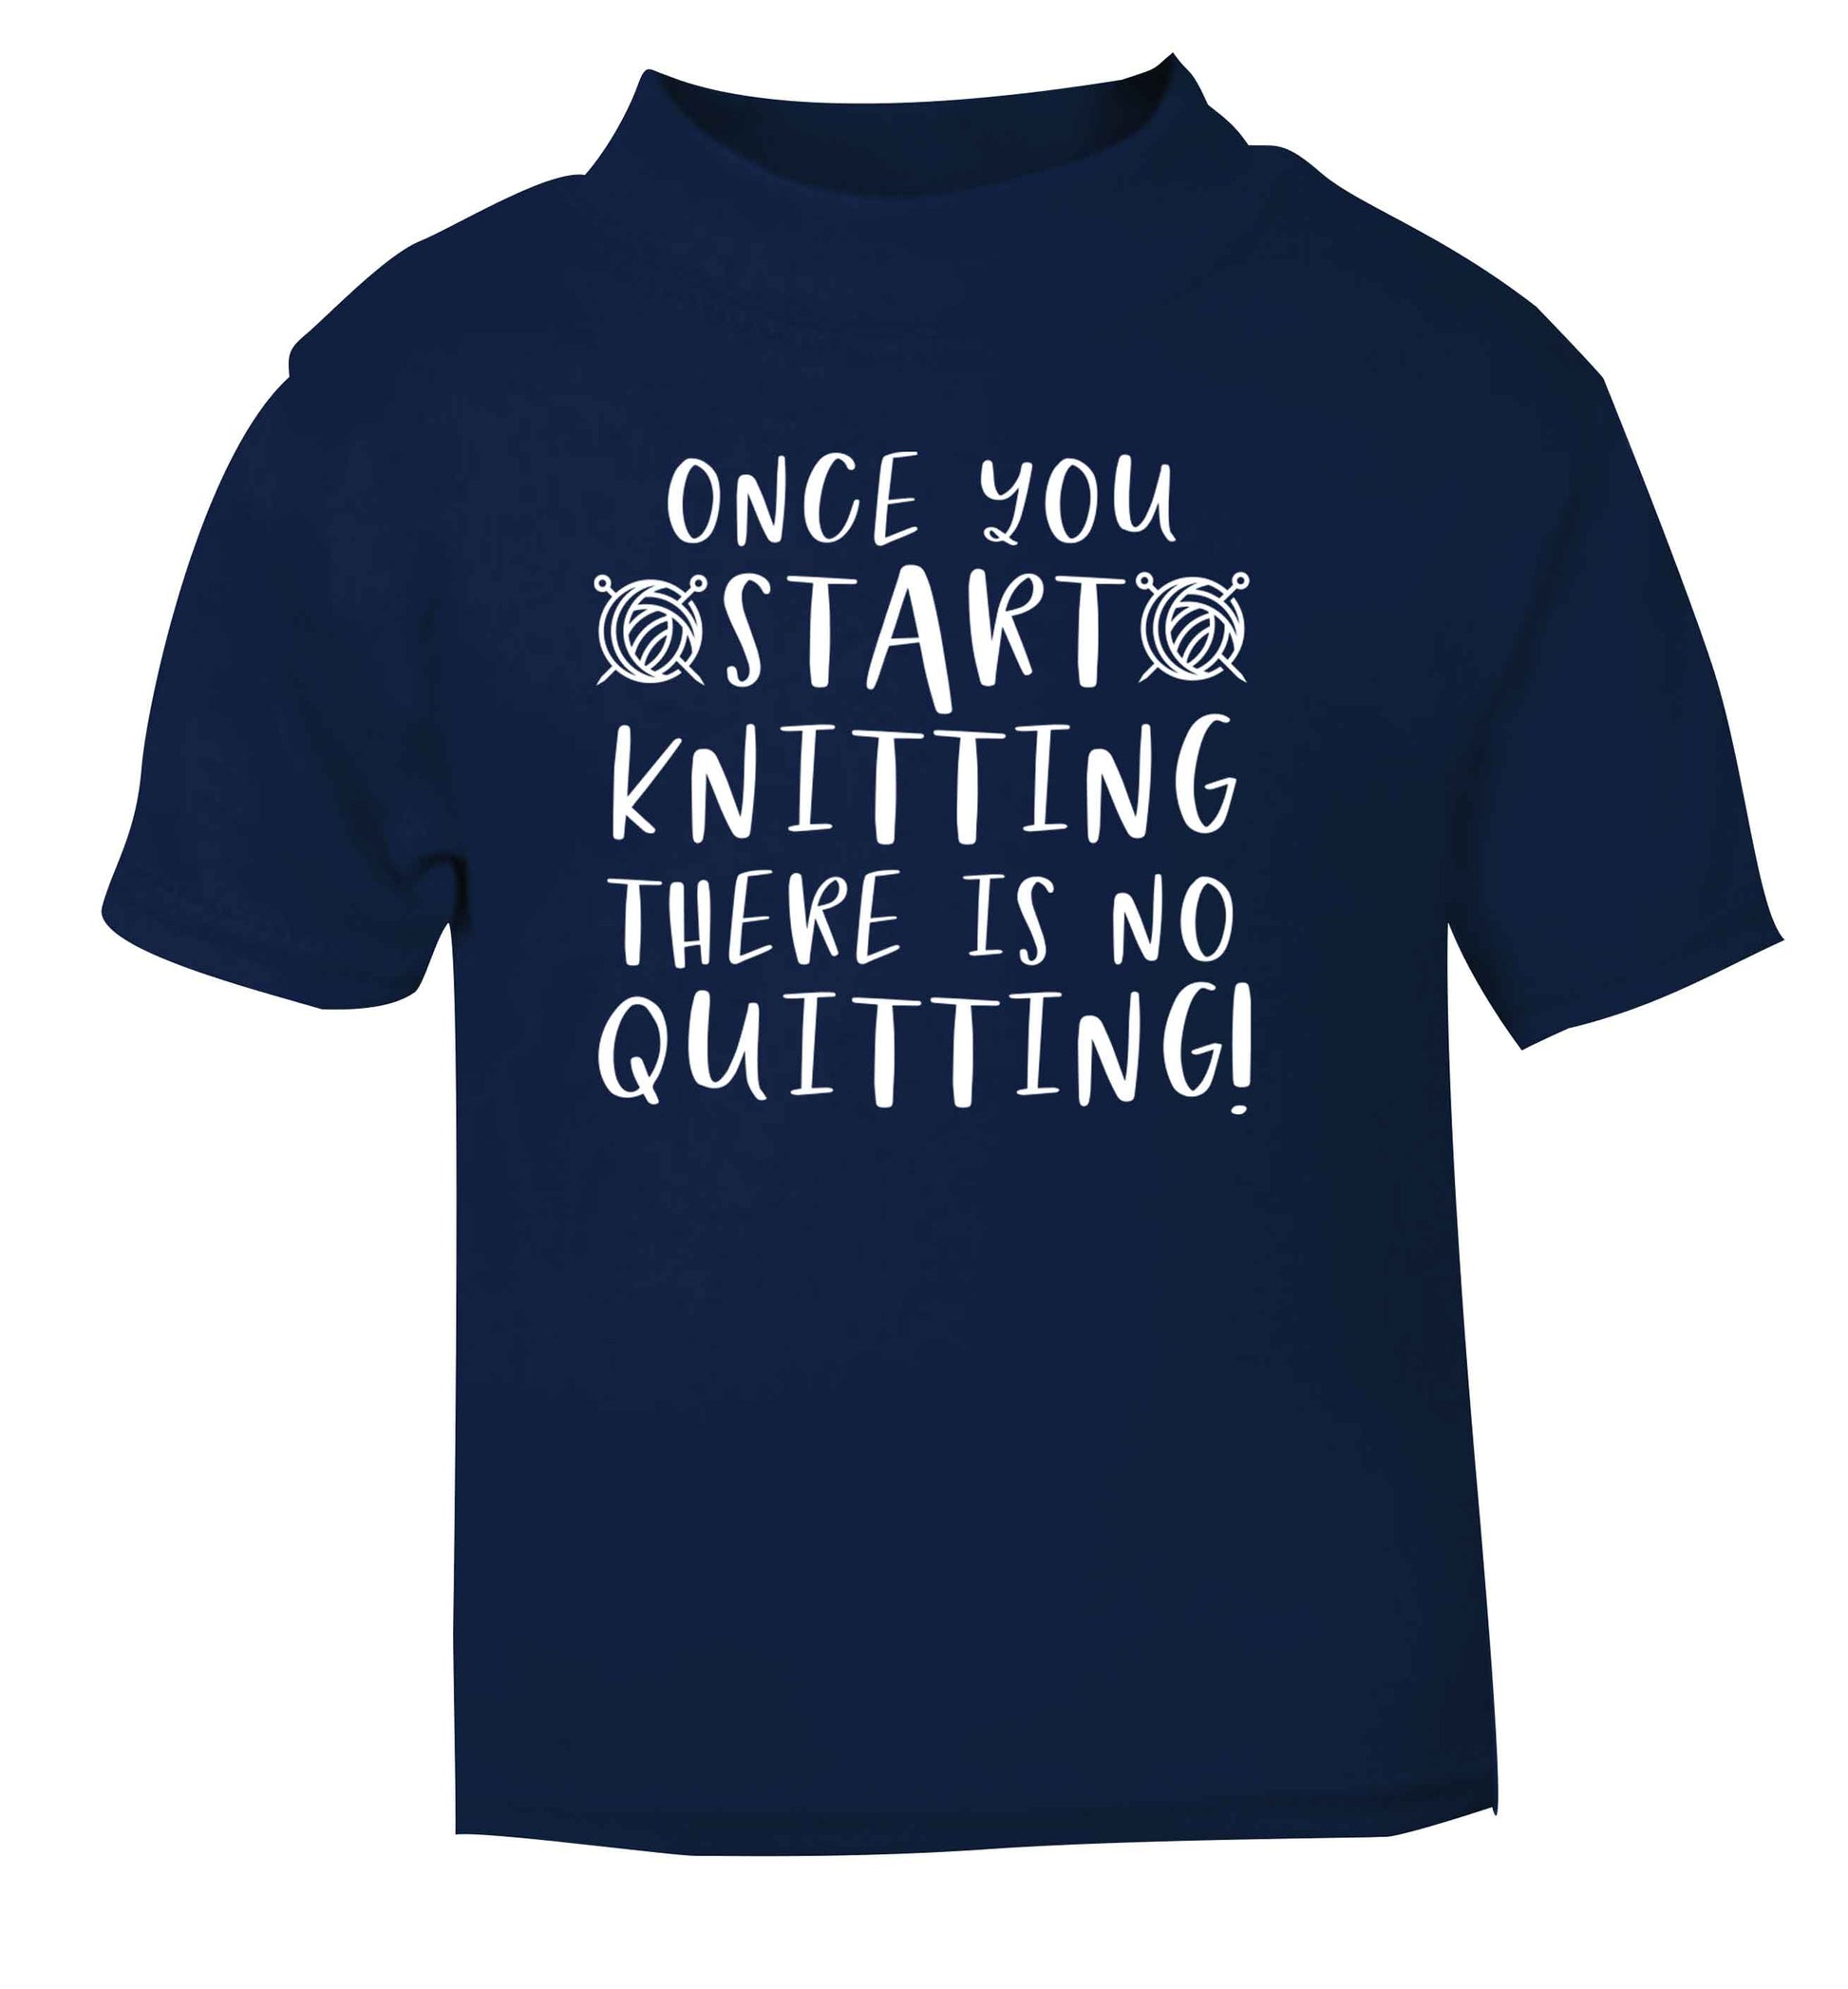 Once you start knitting there is no quitting! navy Baby Toddler Tshirt 2 Years